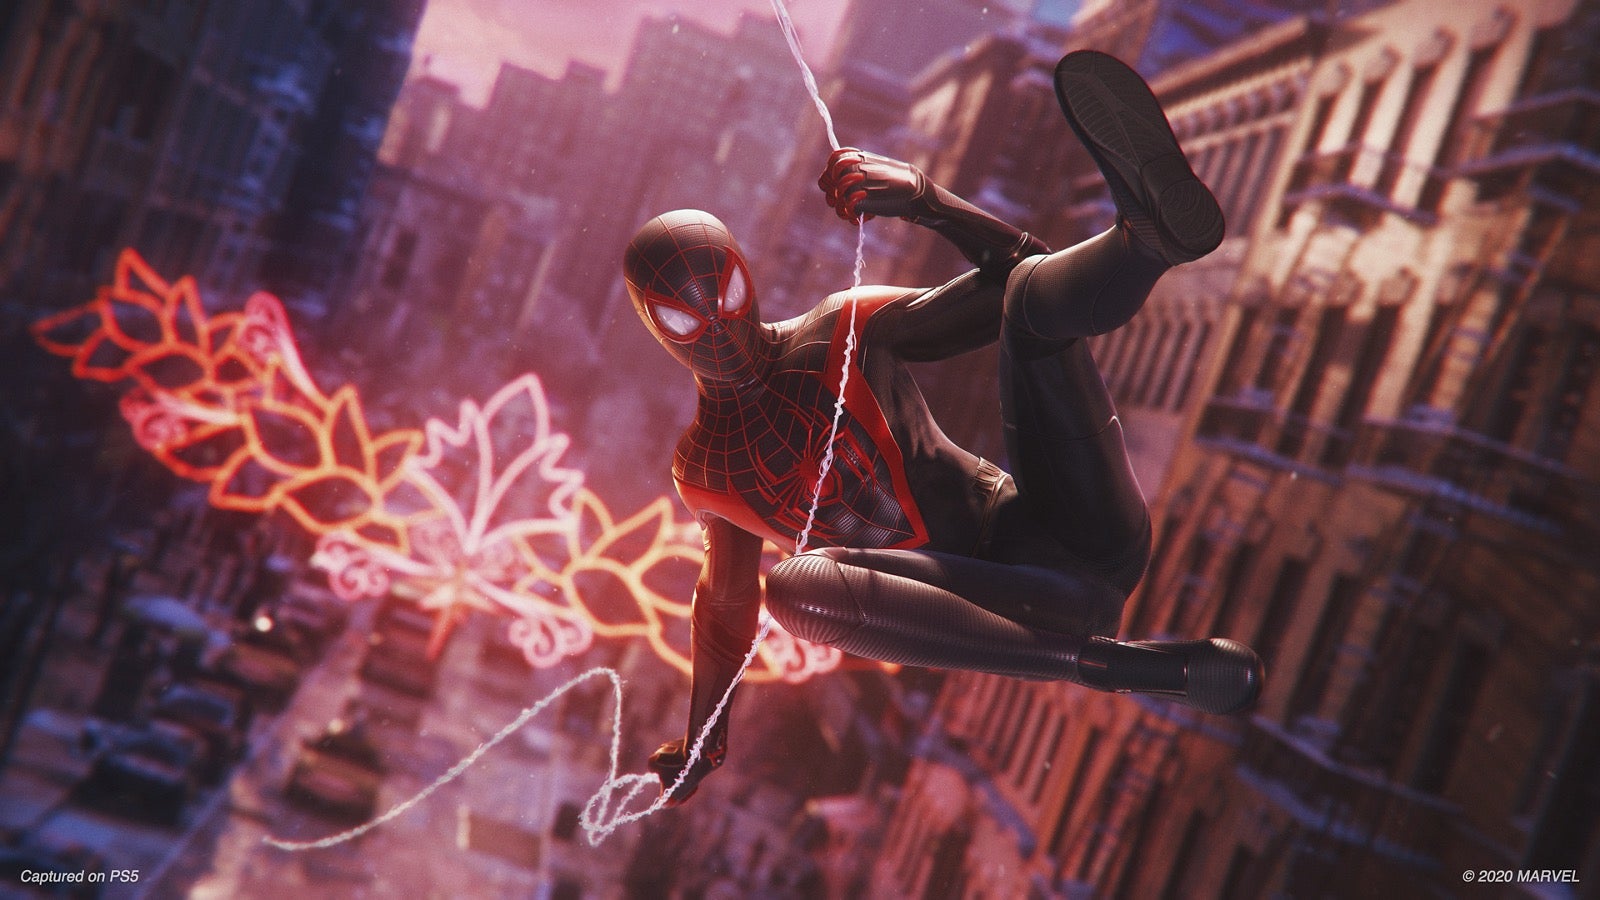 game Image for Every game should put web-swinging in it, regardless of the other content